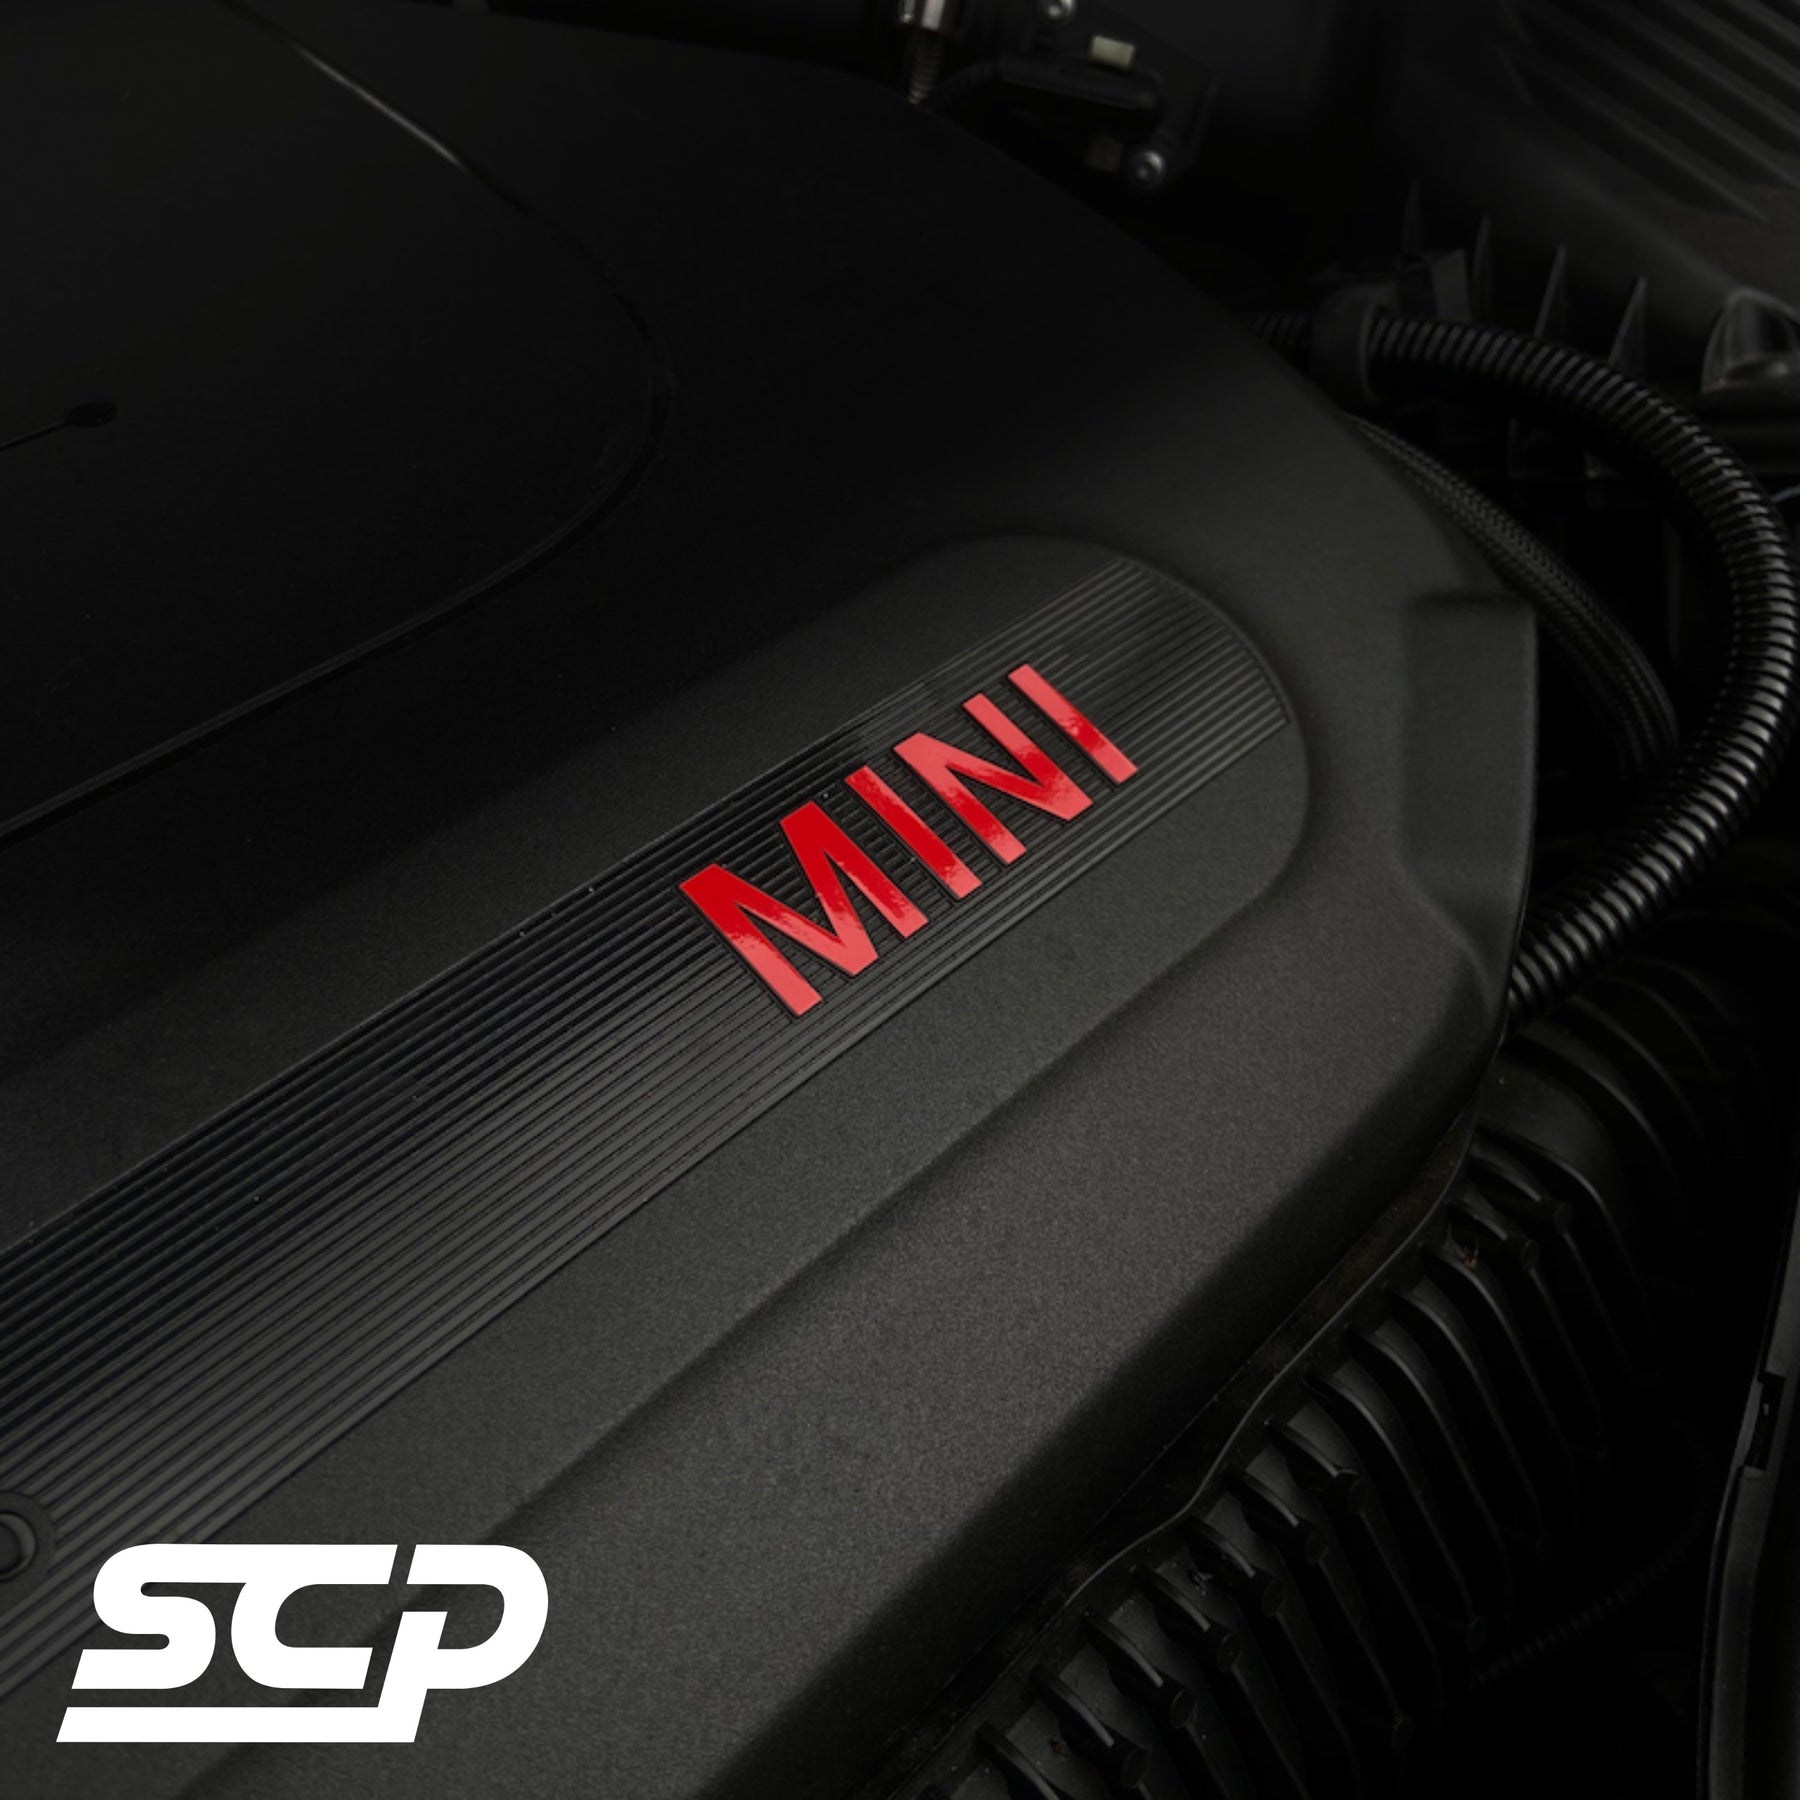 MINI F-Series LCI Engine Bay Lettering Decal - SCP Automotive